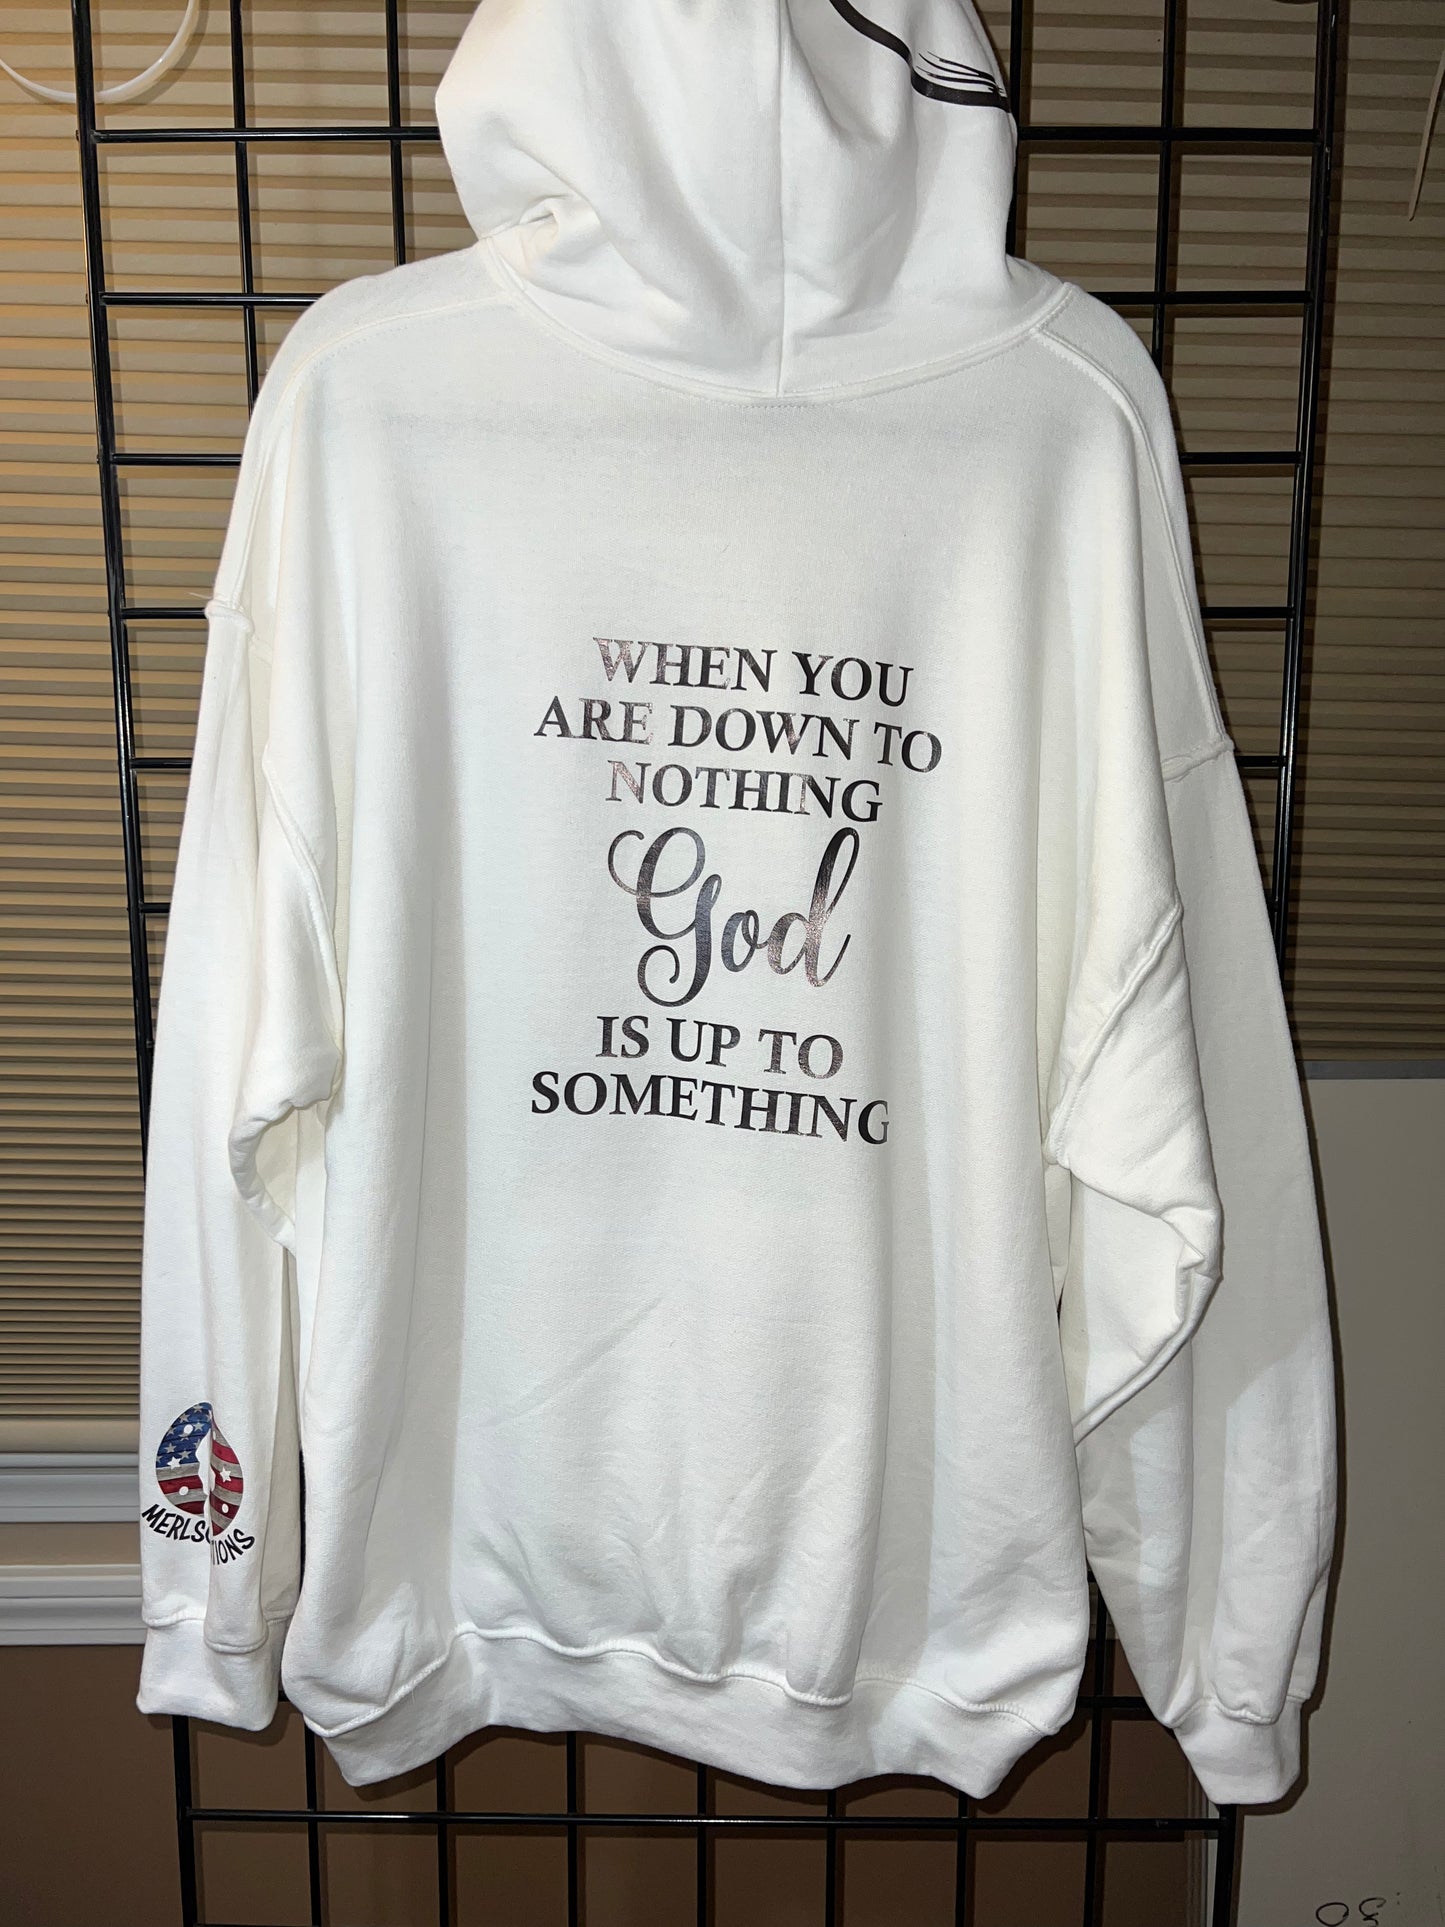 XL White Hoodie - GOD is up to something